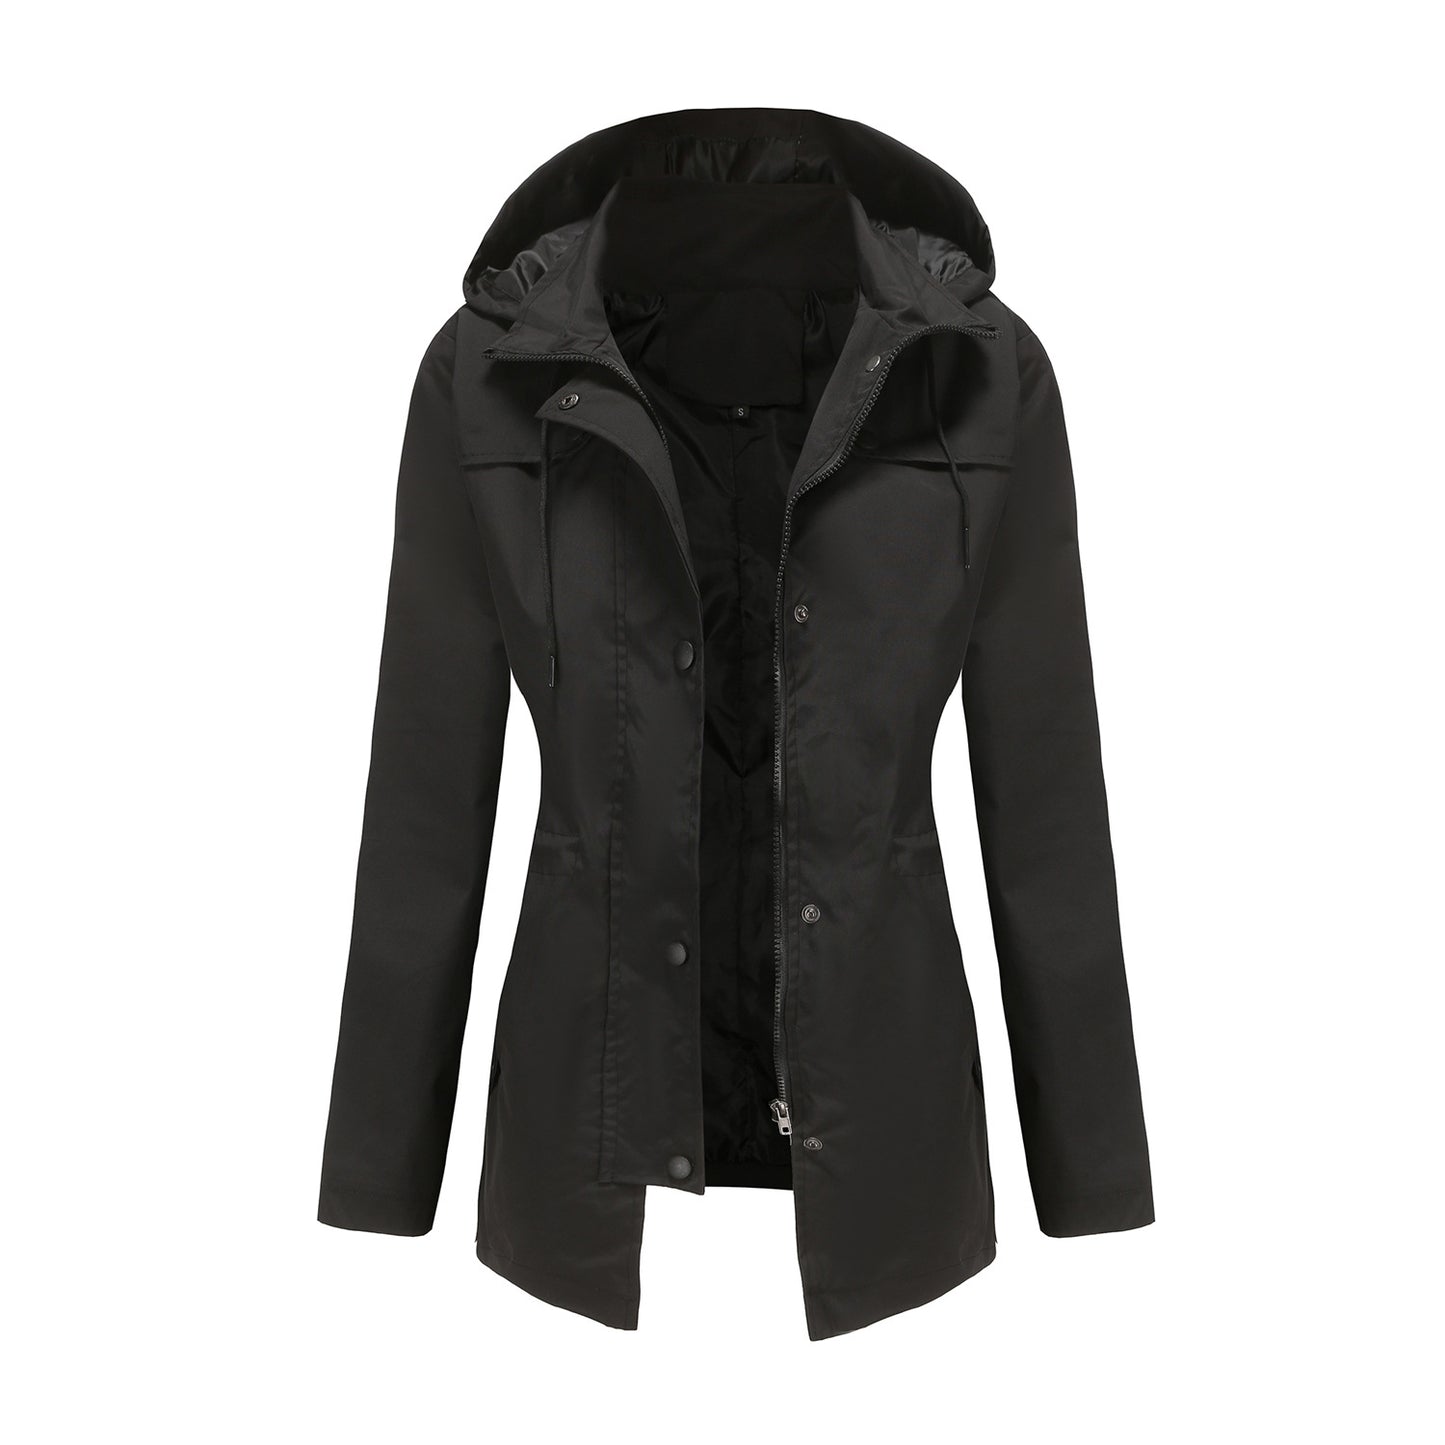 Hooded Outdoor Long Jacket For Women